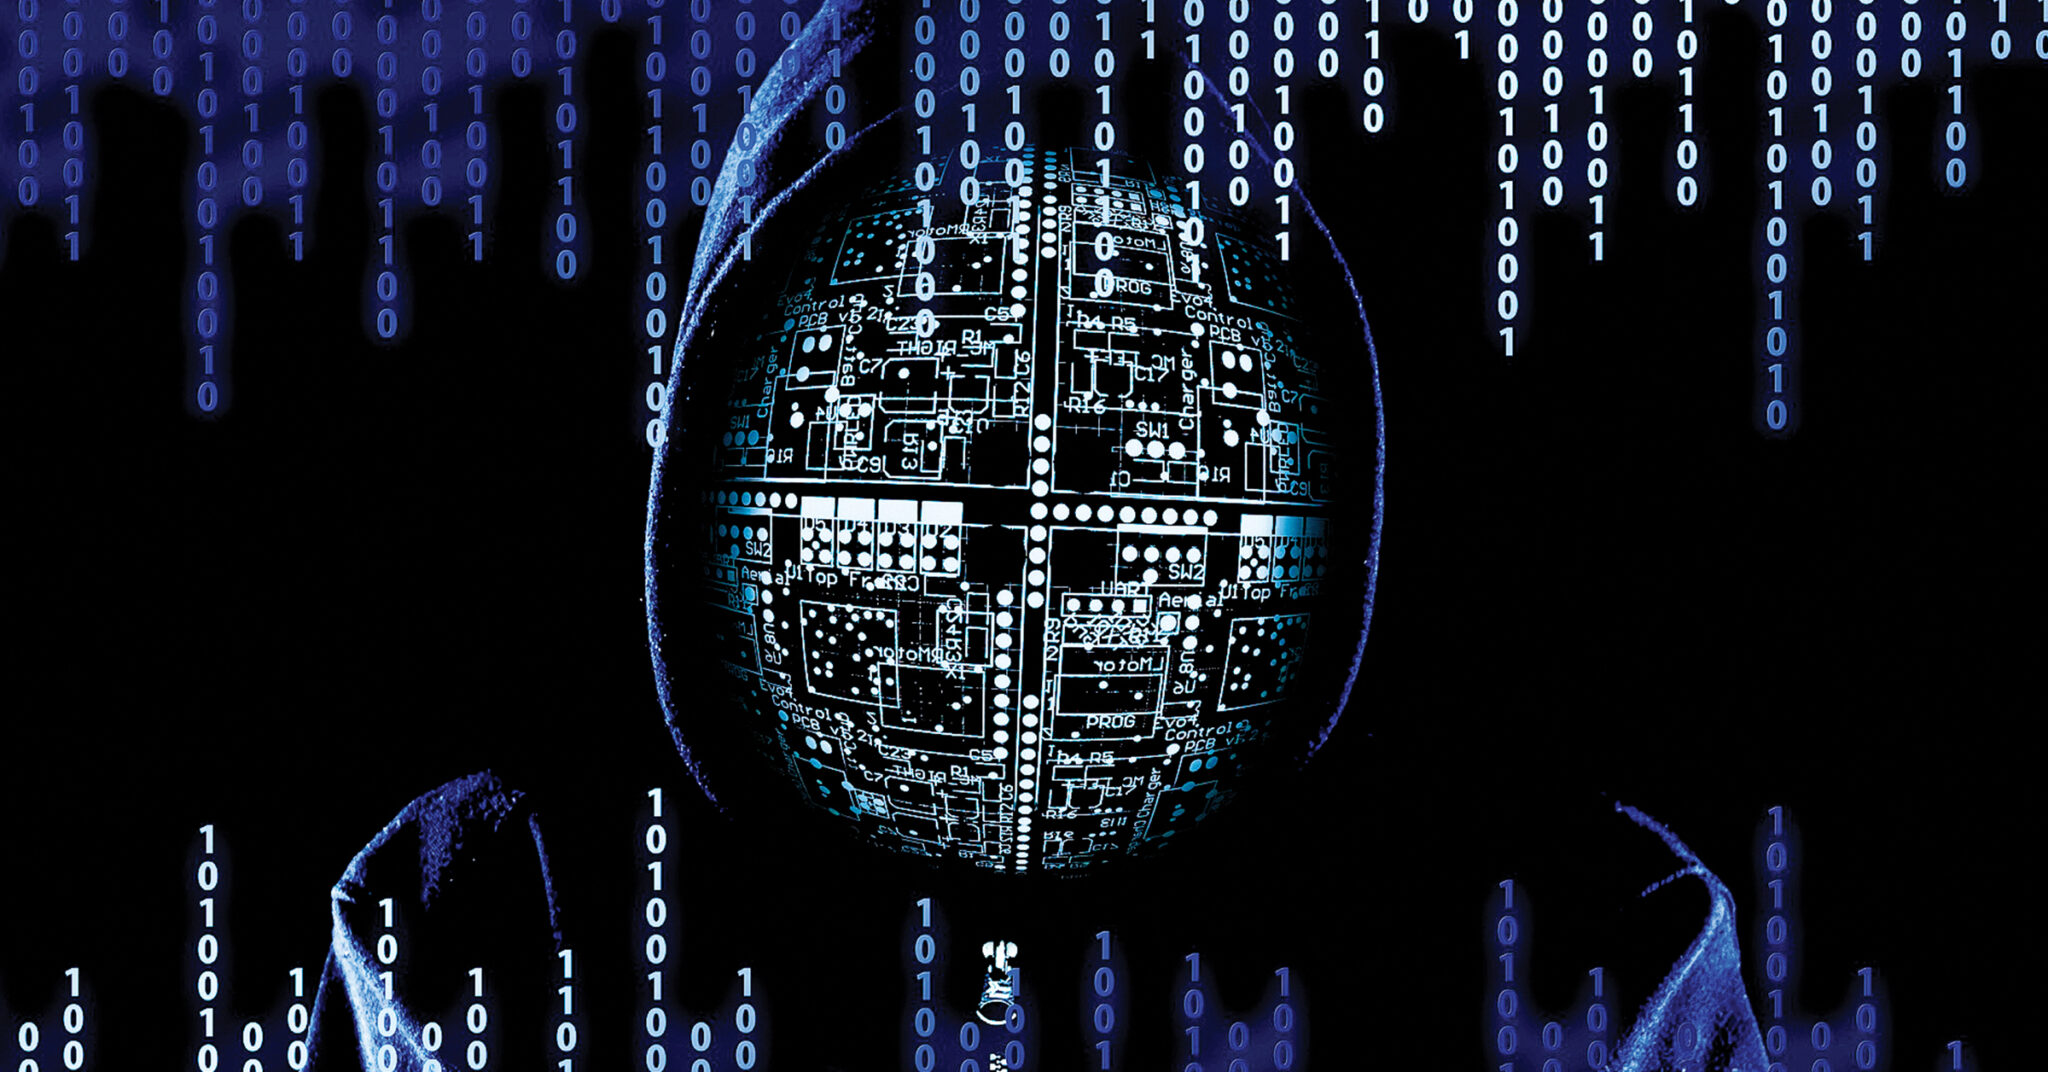 Cyber Insurance | An image of a man in a hood with computer binary and a computer chip pattern superimposed over top